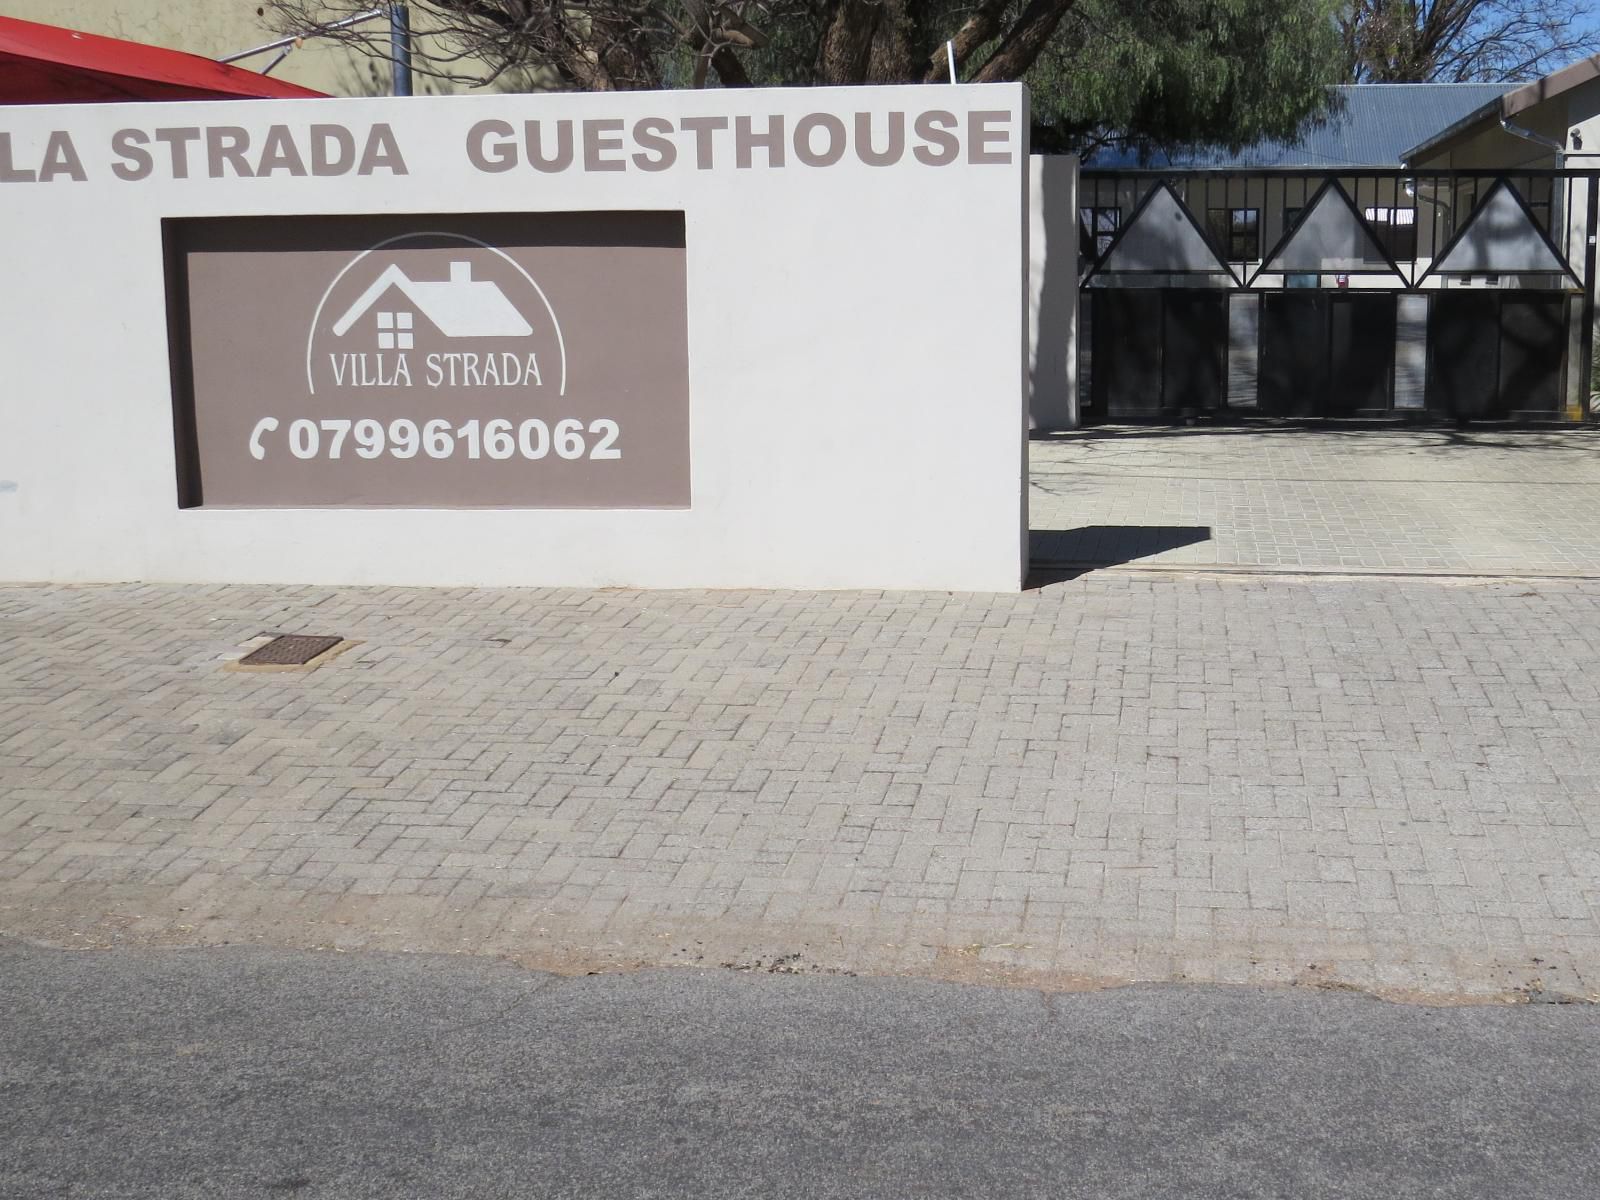 Villa Strada Guesthouse Klerksdorp North West Province South Africa Unsaturated, Sign